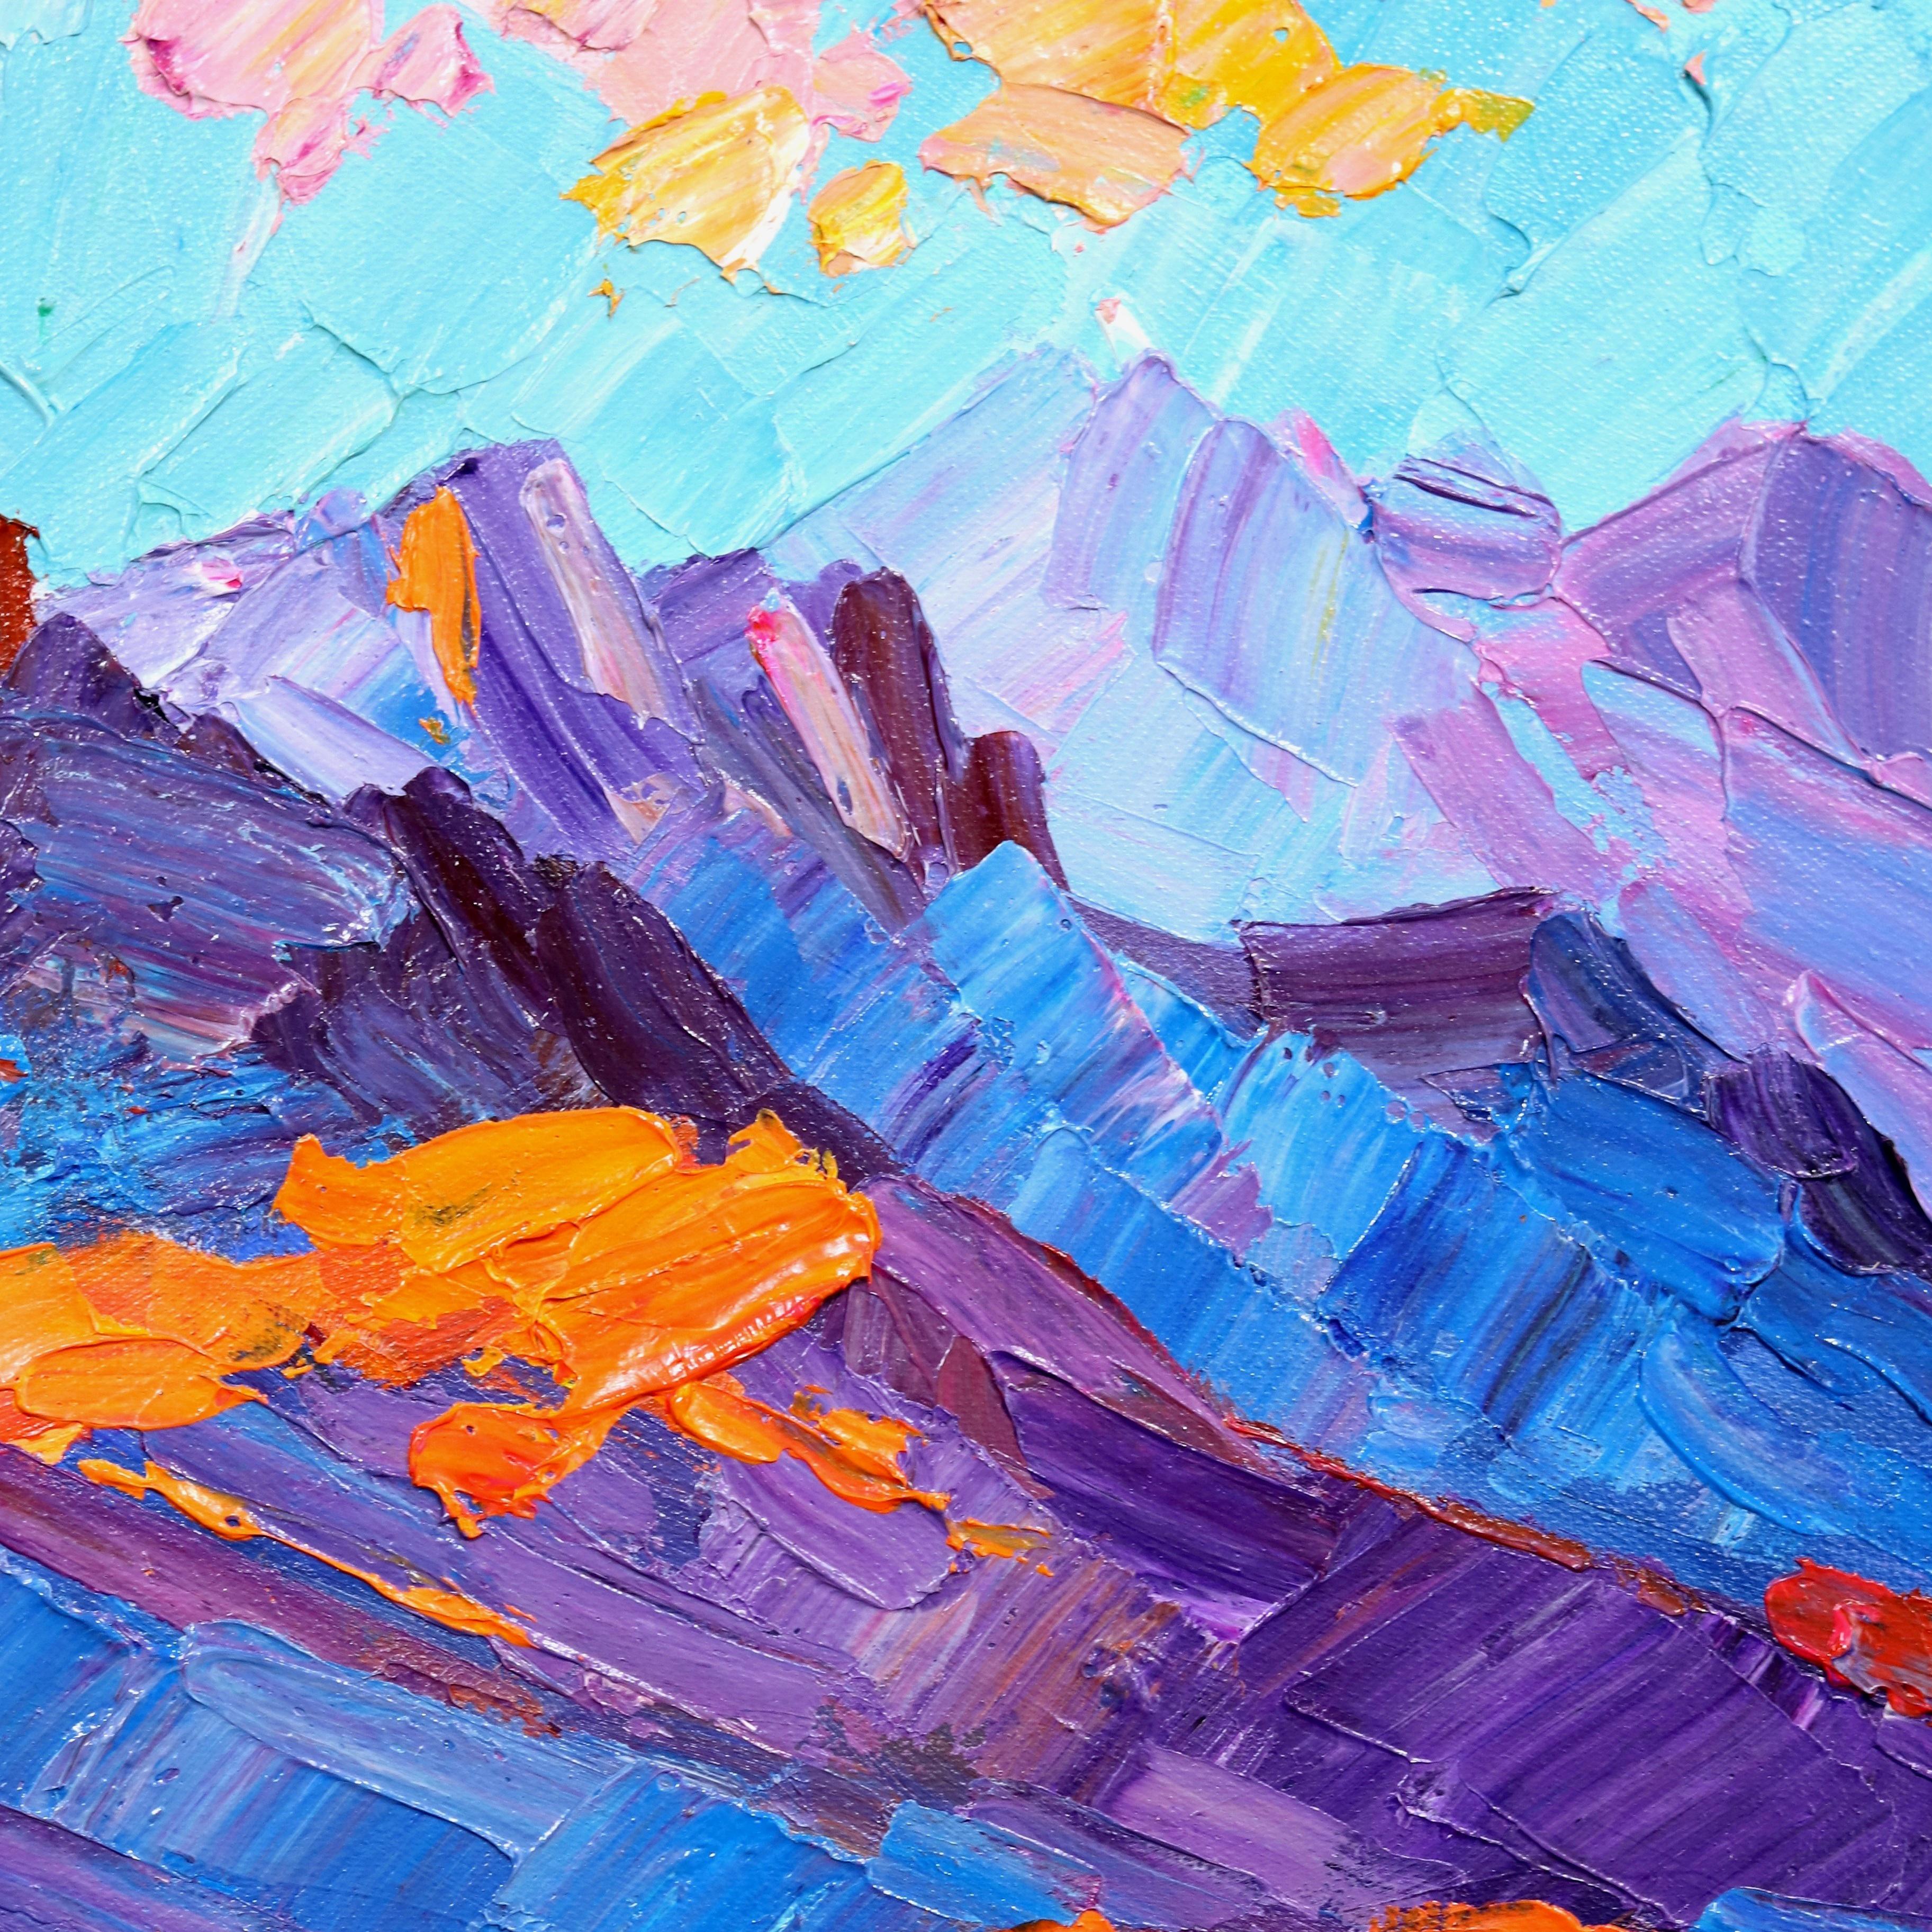 A Spark in the Sky - Vibrant Textural Mountain Desert Landscape Oil Painting 5